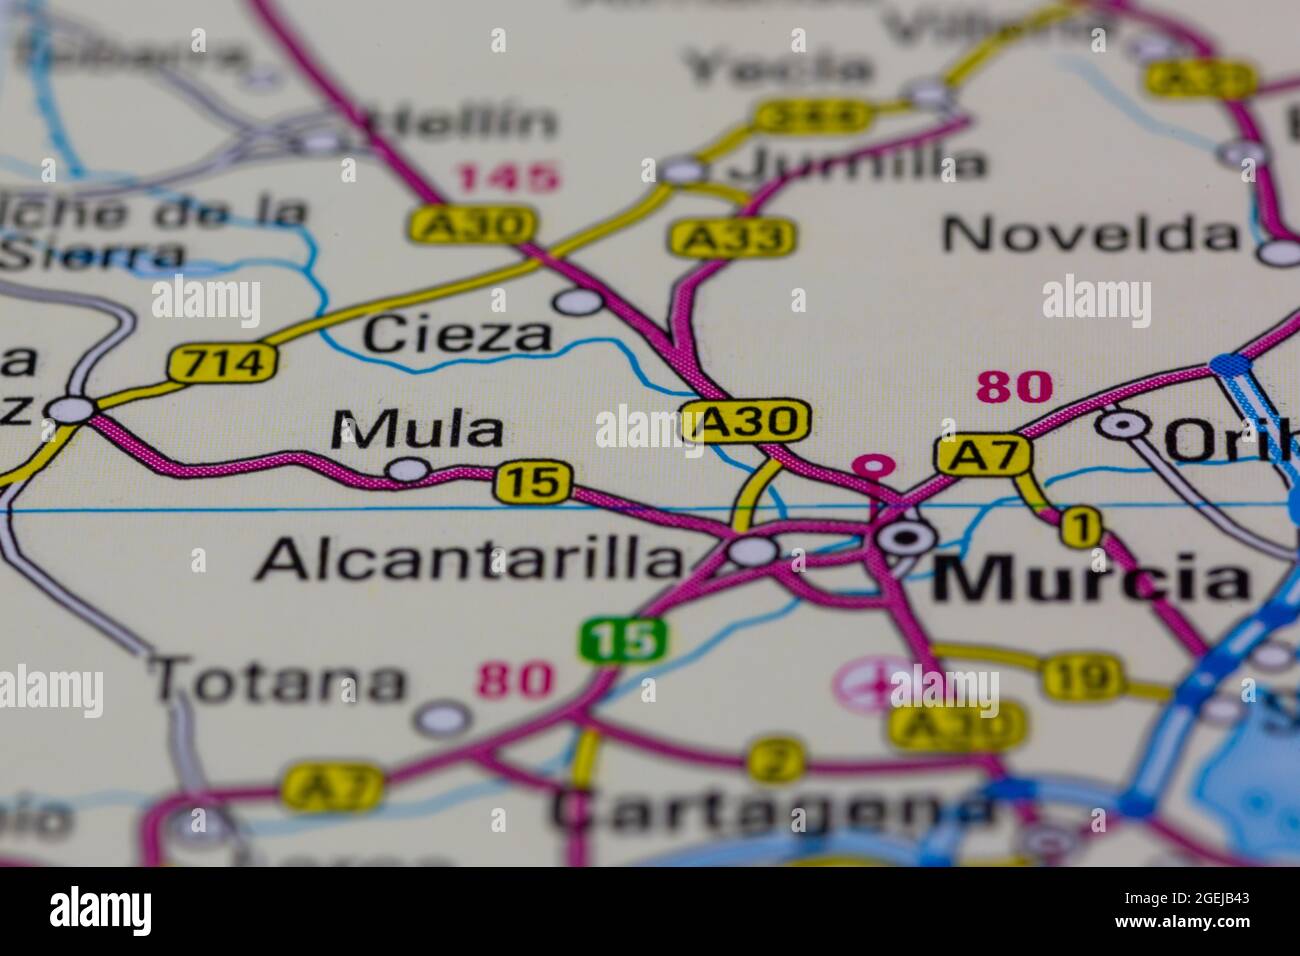 Mula Spain shown on a road map or Geography map Stock Photo